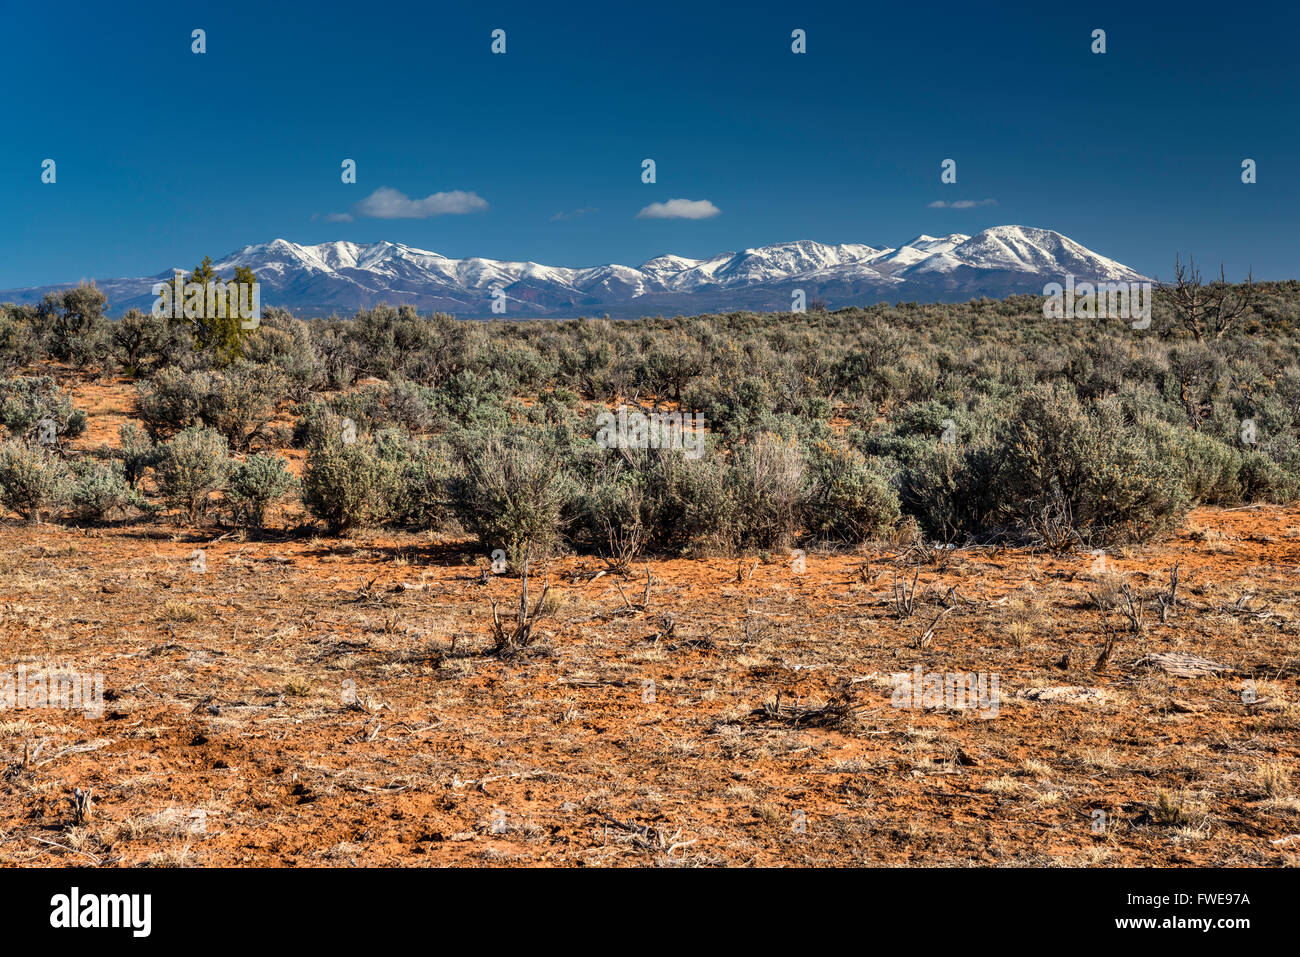 Juniper shrubland, snowcapped Abajo Mountains in distance, early spring, Bears Ears National Monument, near Blanding, Utah, USA Stock Photo